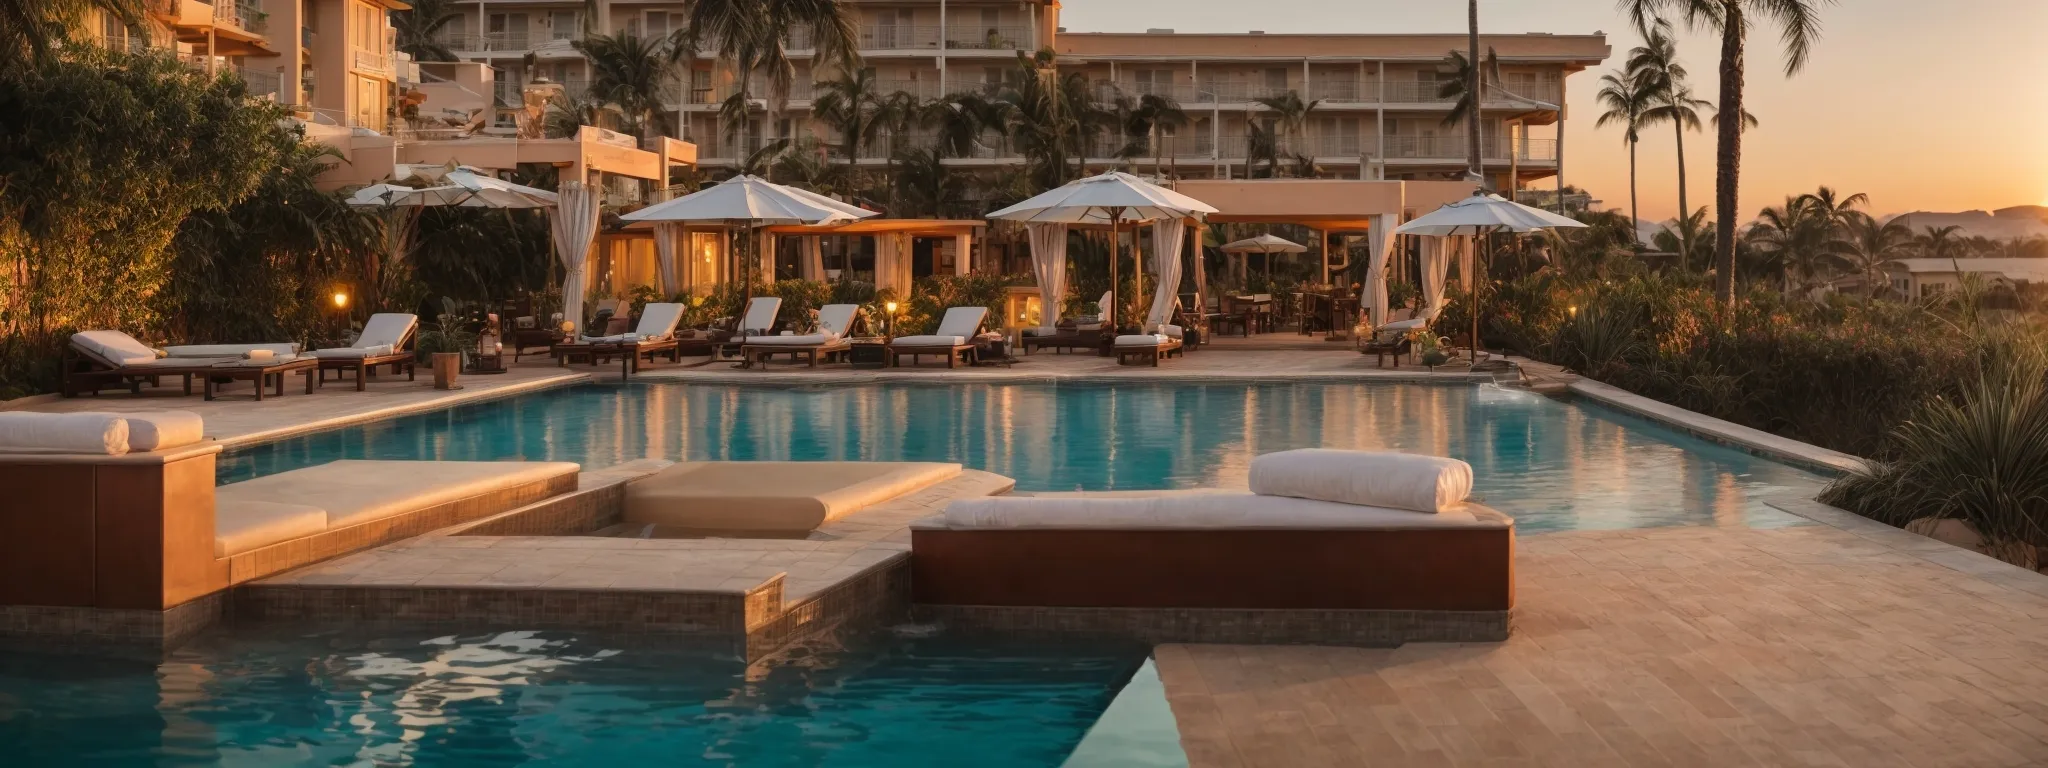 a hotel's picturesque poolside area set against a sunset, captured in a vibrant social media post.